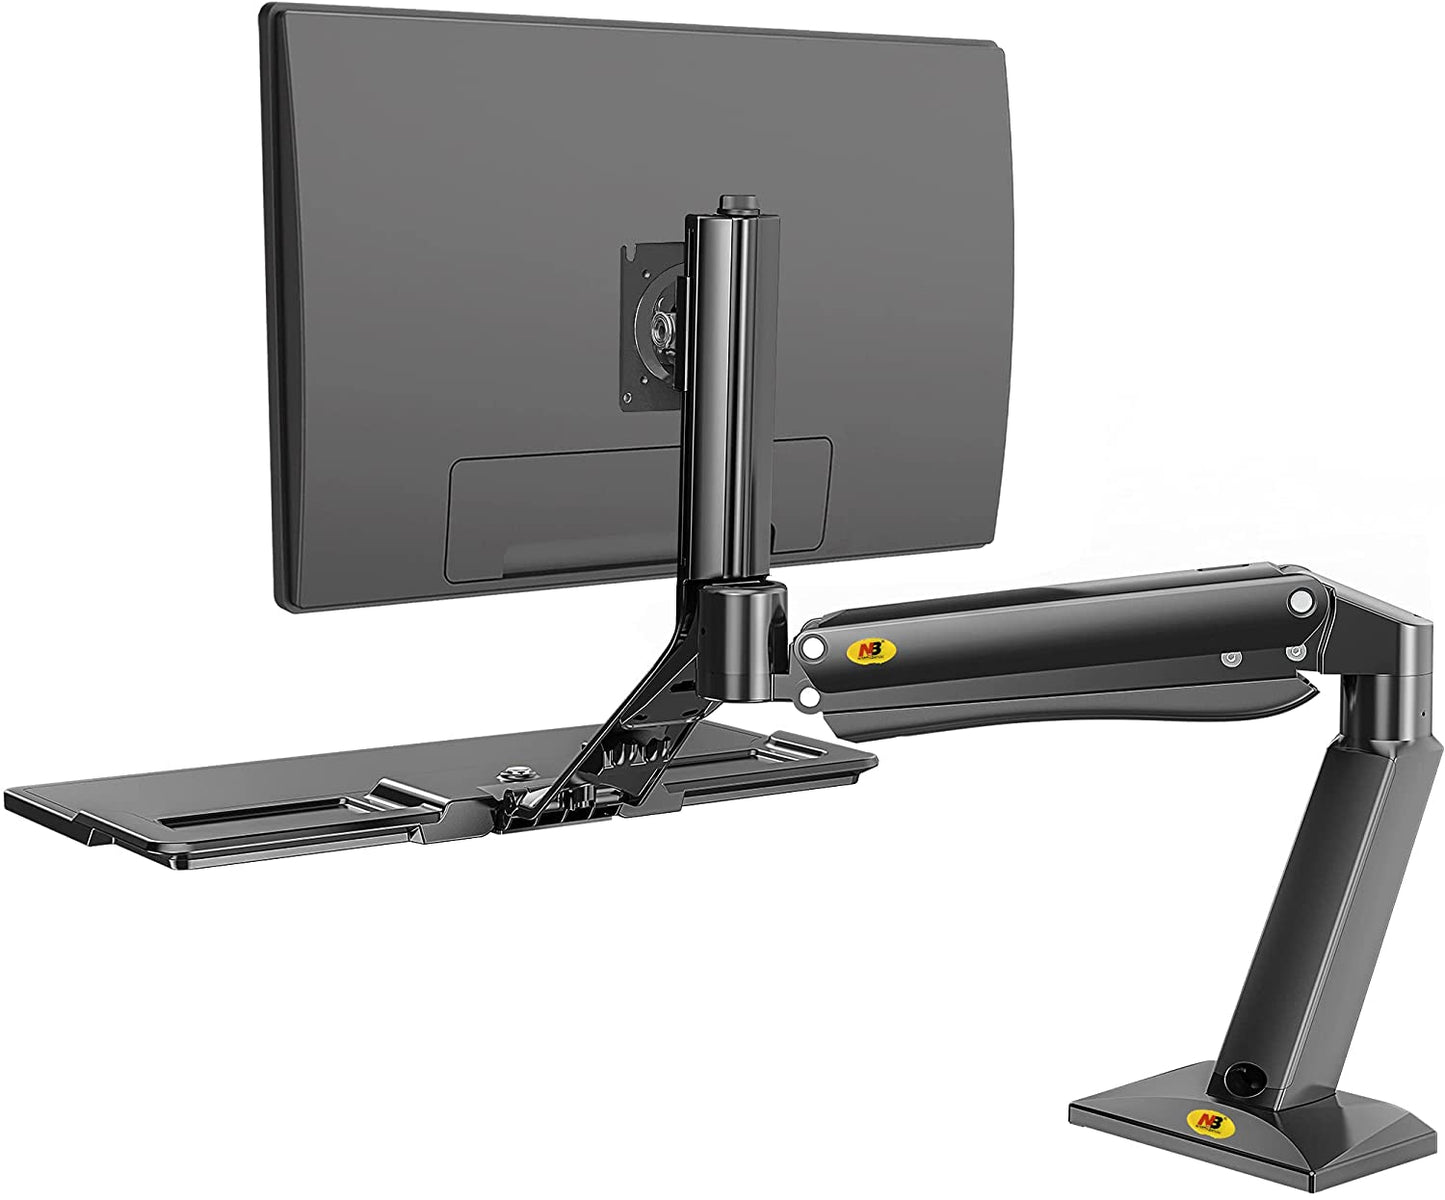 NB North Bayou NB40 22"- 32" with 15Kg Max Payload Sit and Stand Workstation VESA Monitor Desk Mount, Keyboard Tray and Gas Strut Full Motion Swivel Arm for LCD LED TV Television